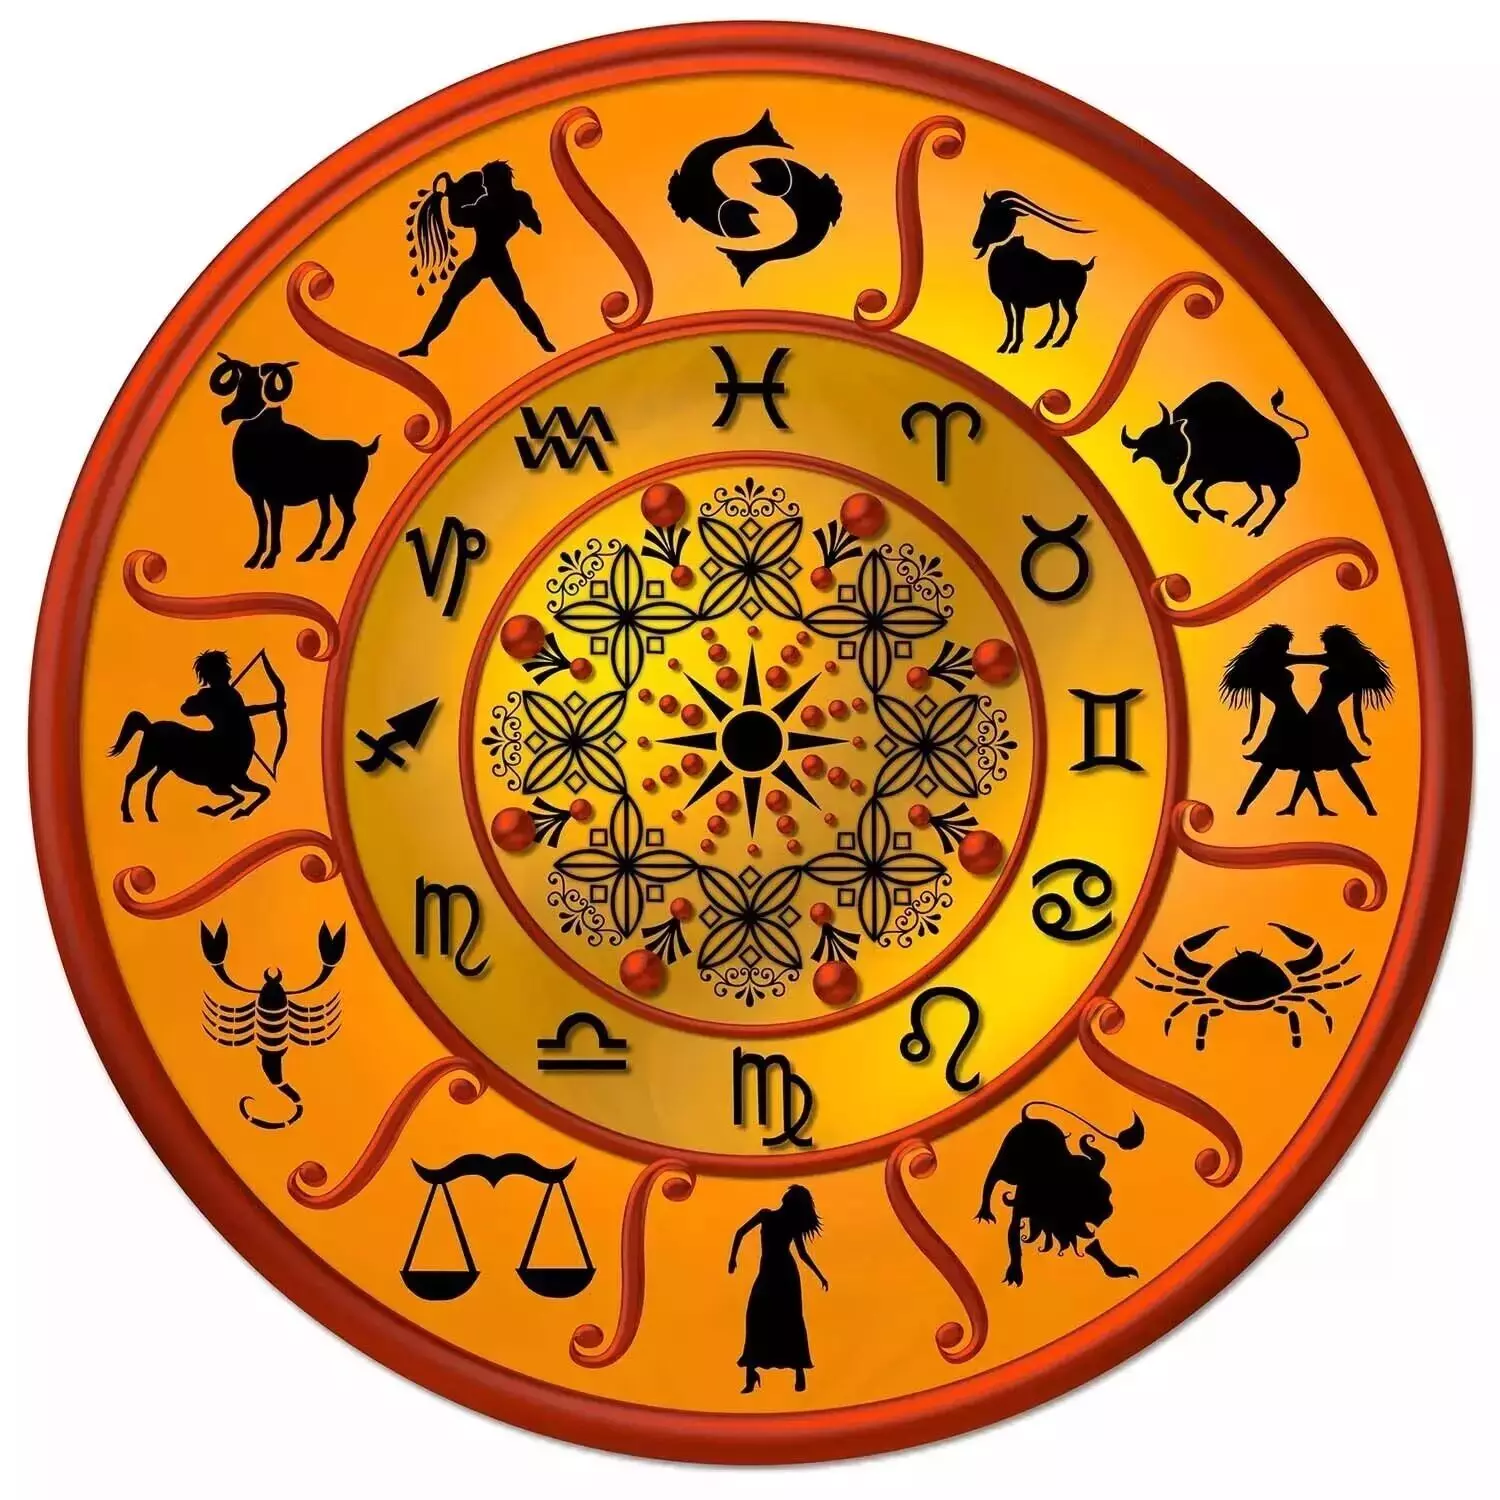 16 April – Know your todays horoscope